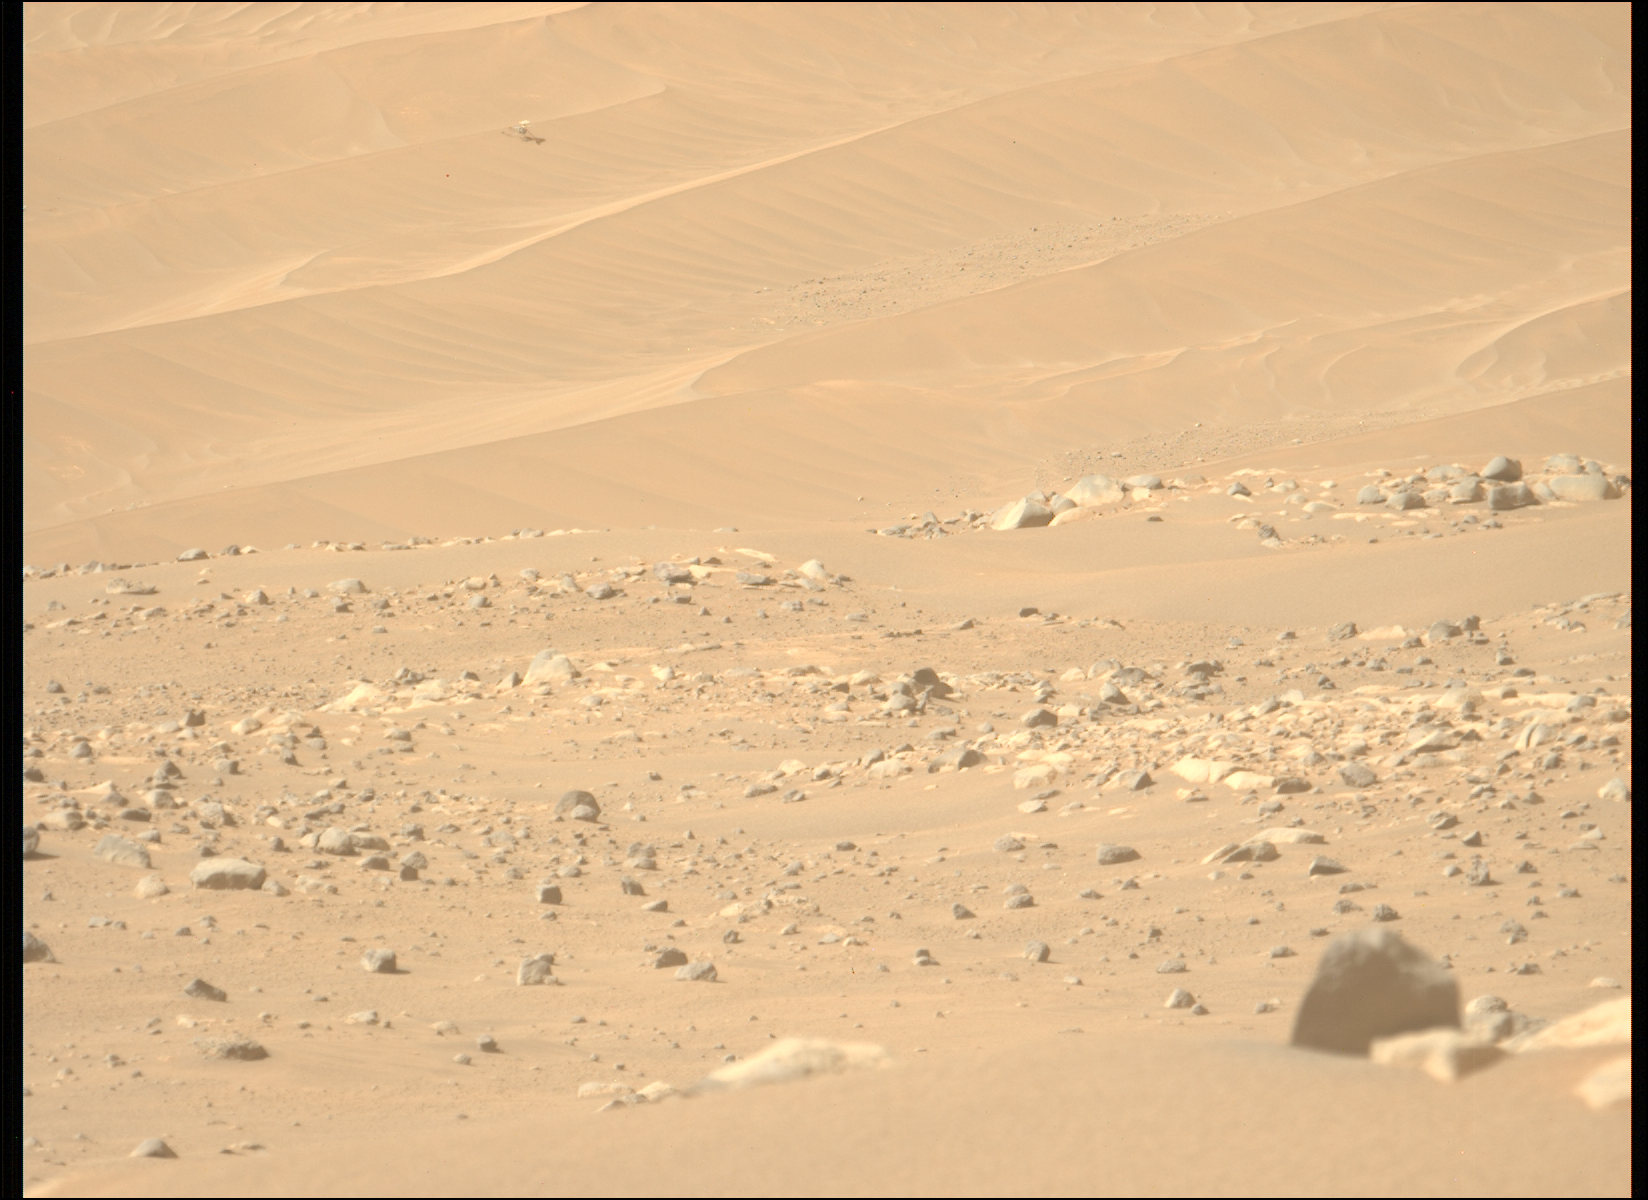 Ingenuity Rover's final resting place on Mars